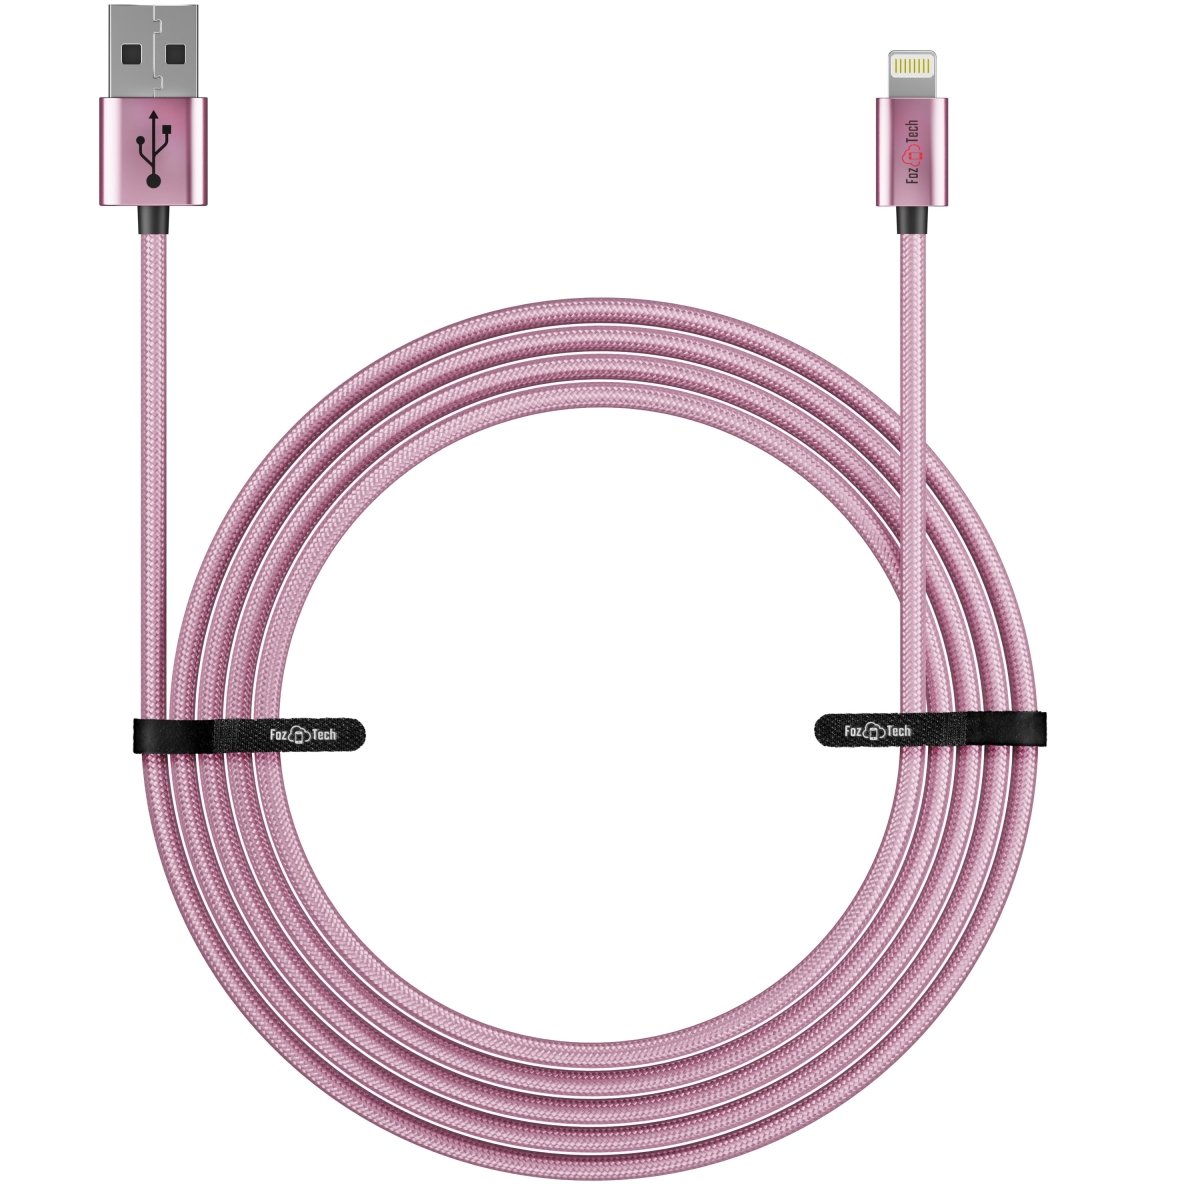 FozTech - CORE Series - USB Charger Cable Data Sync Lead for iPhone, iPad, iPod - Rose Gold - USB Cable - FozTech Official Store